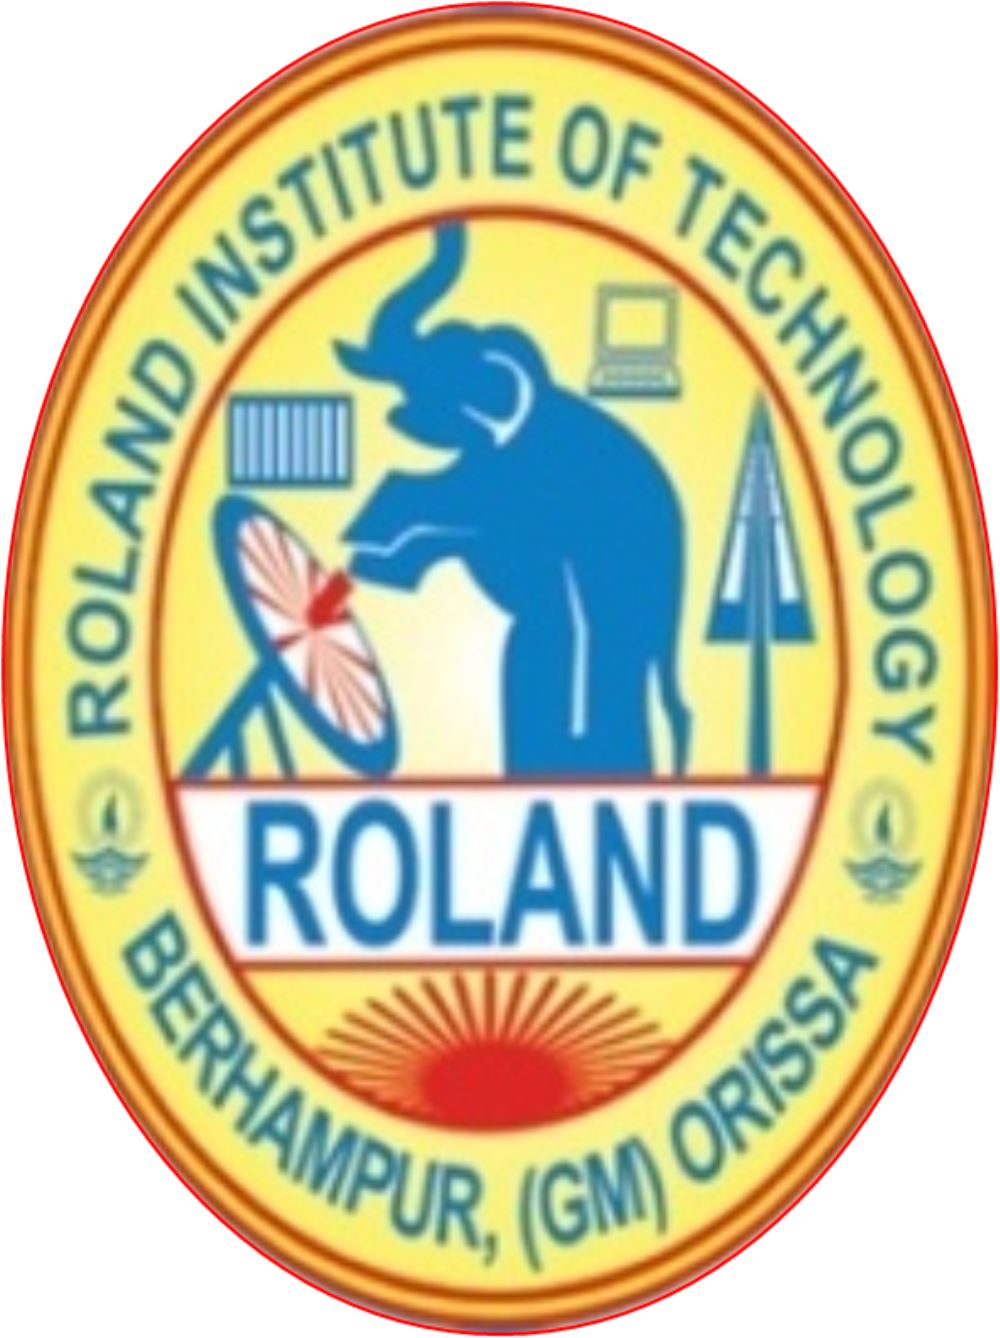 ROLAND INSTITUTE OF TECHNOLOGY